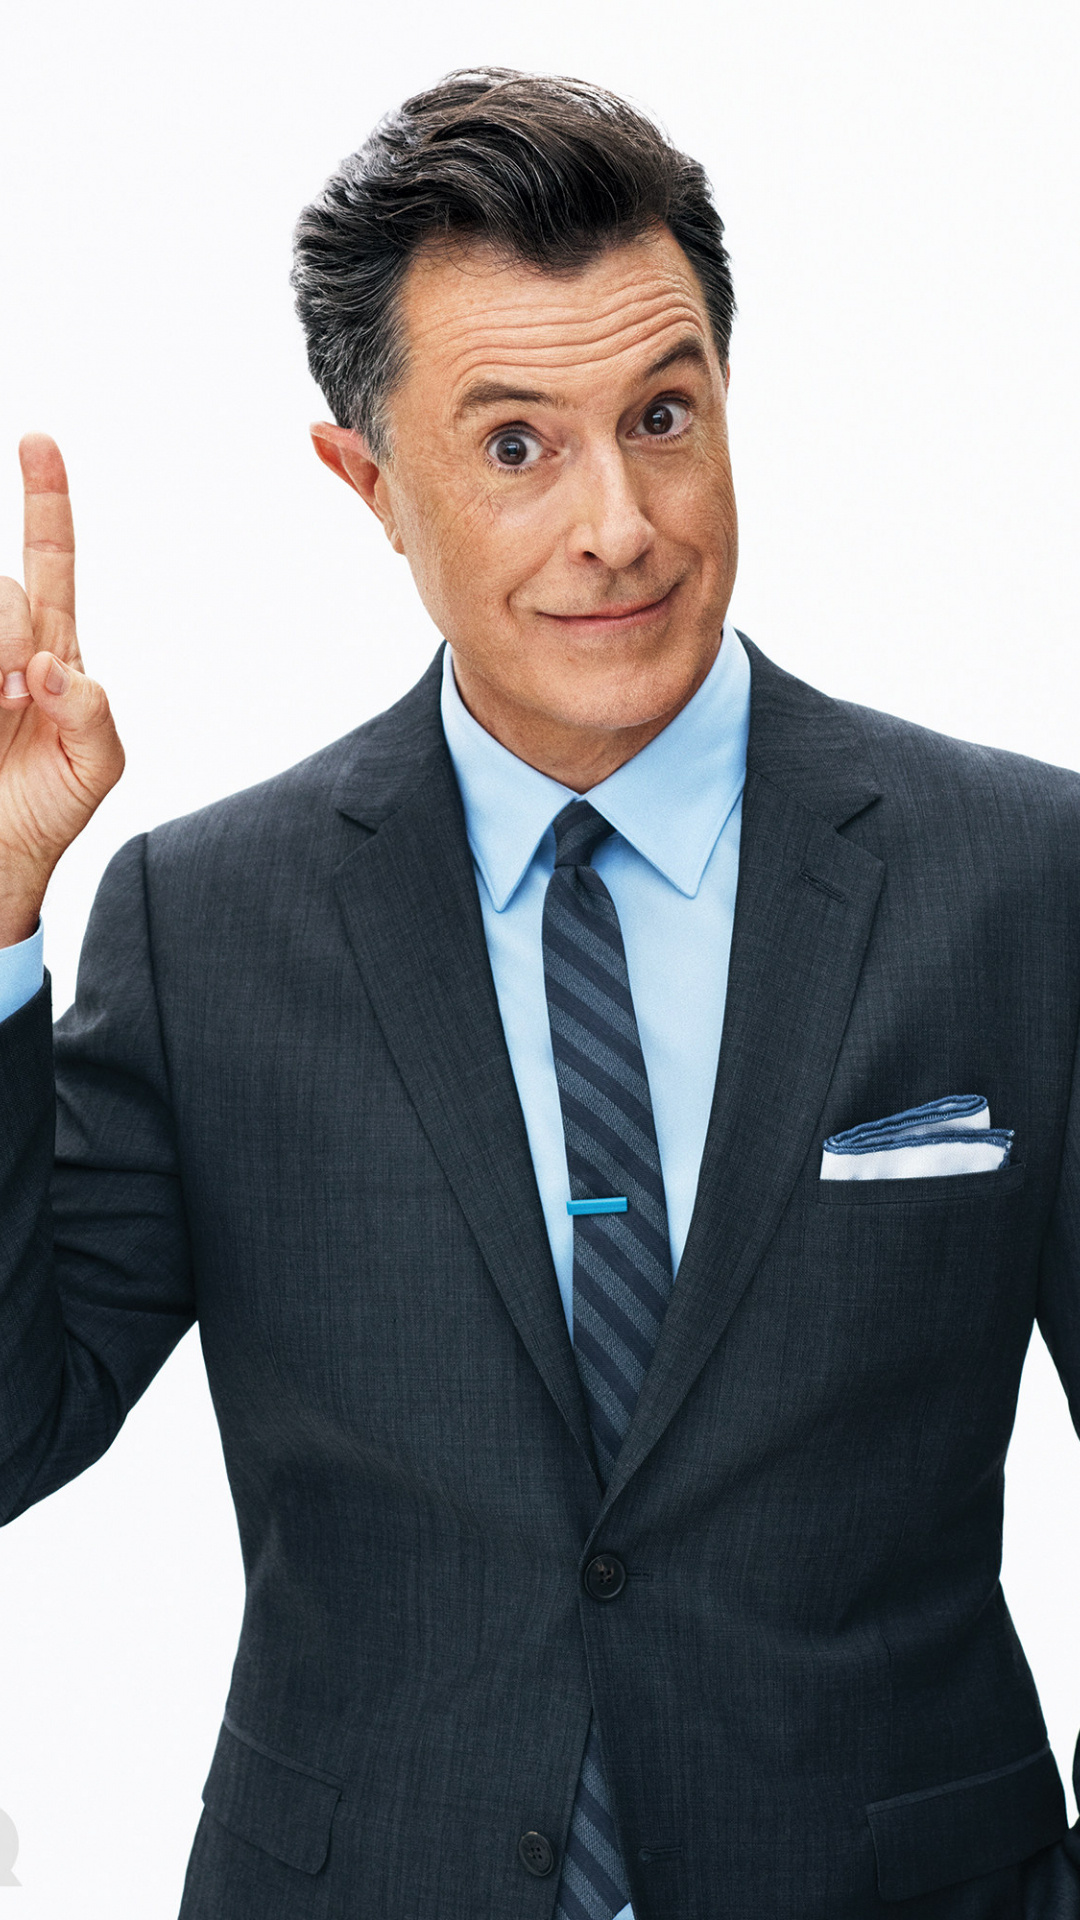 Stephen Colbert wallpapers high resolution, Quality download, Celebrity portraits, Stephen Curry crossover, 1080x1920 Full HD Handy